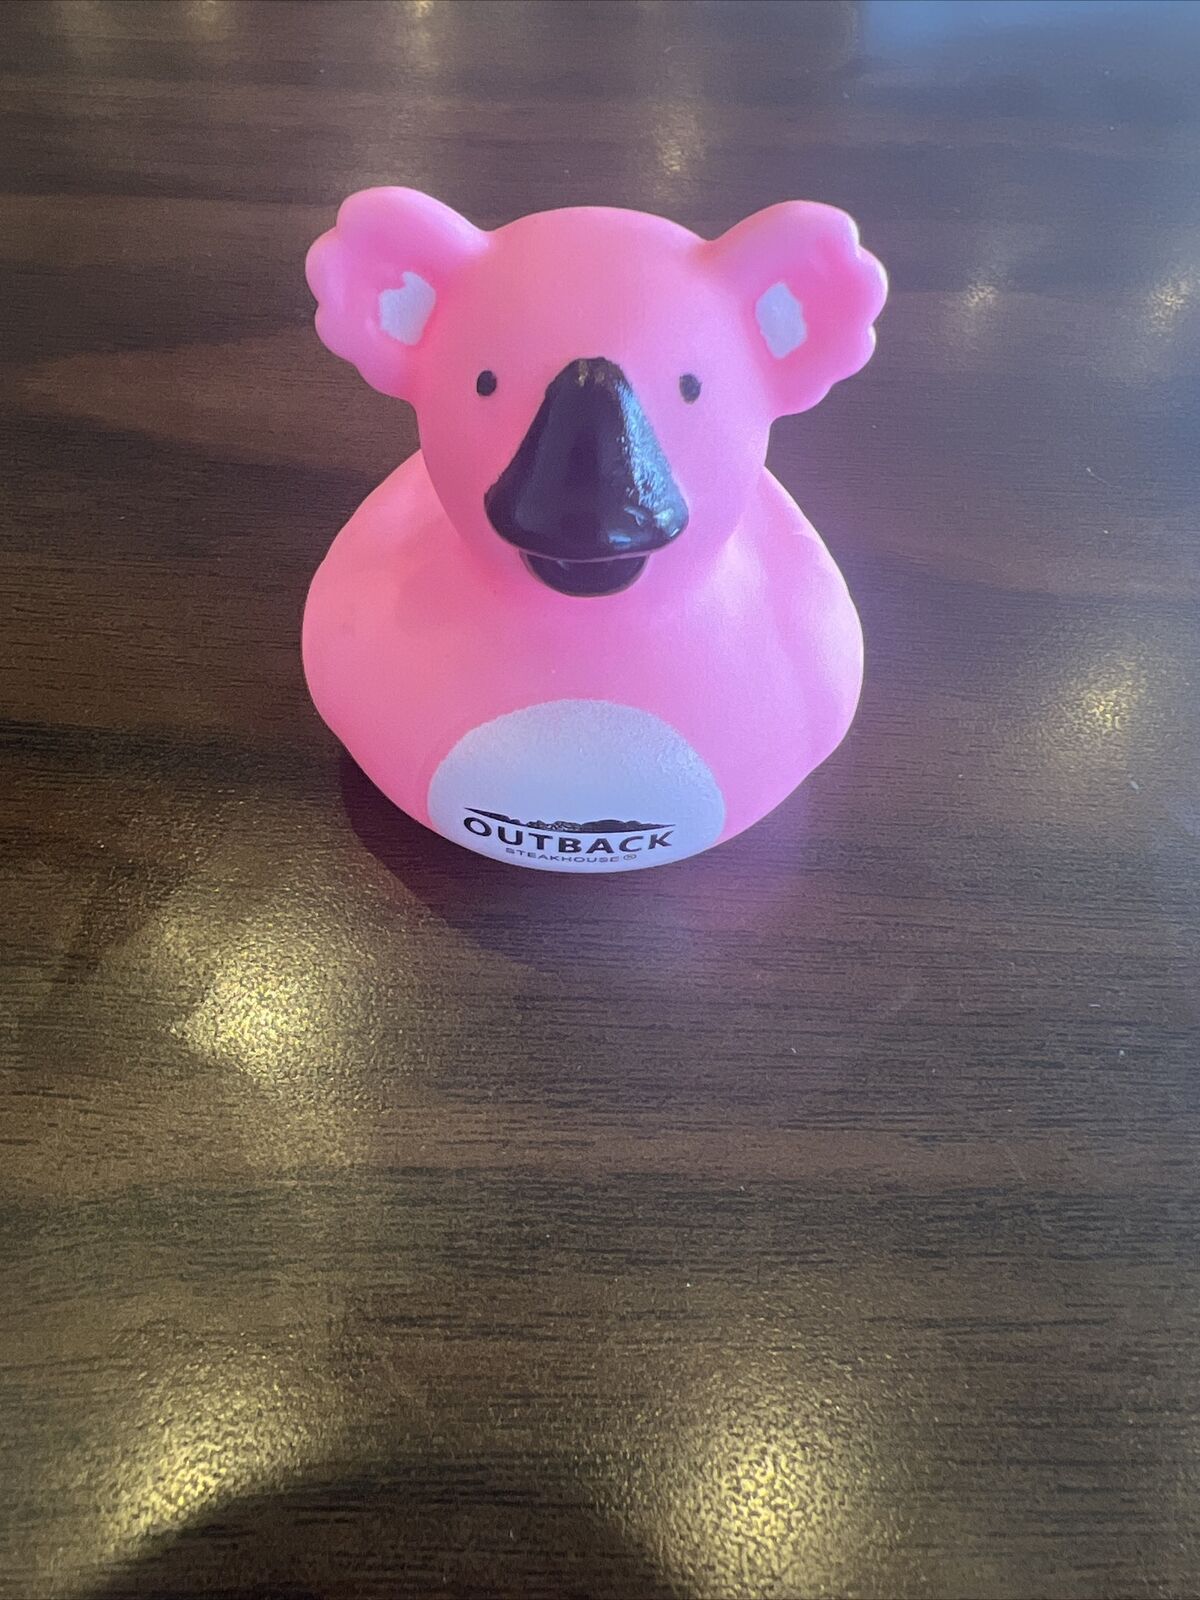 Limited Edition 2” Outback Steakhouse Exclusive Koala Bear Rubber Ducks “New”